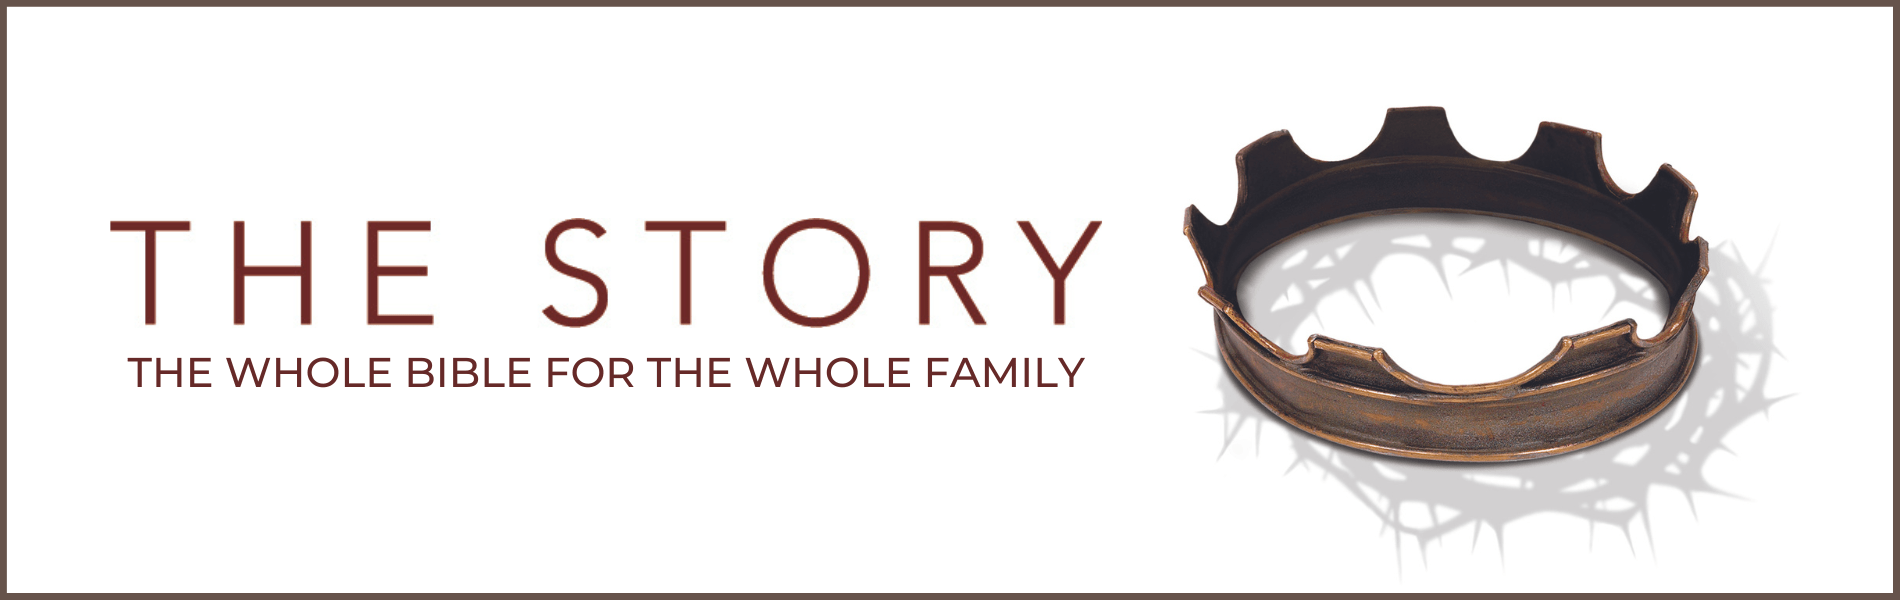 The Story Banner Website 2 (1900 × 600 px)